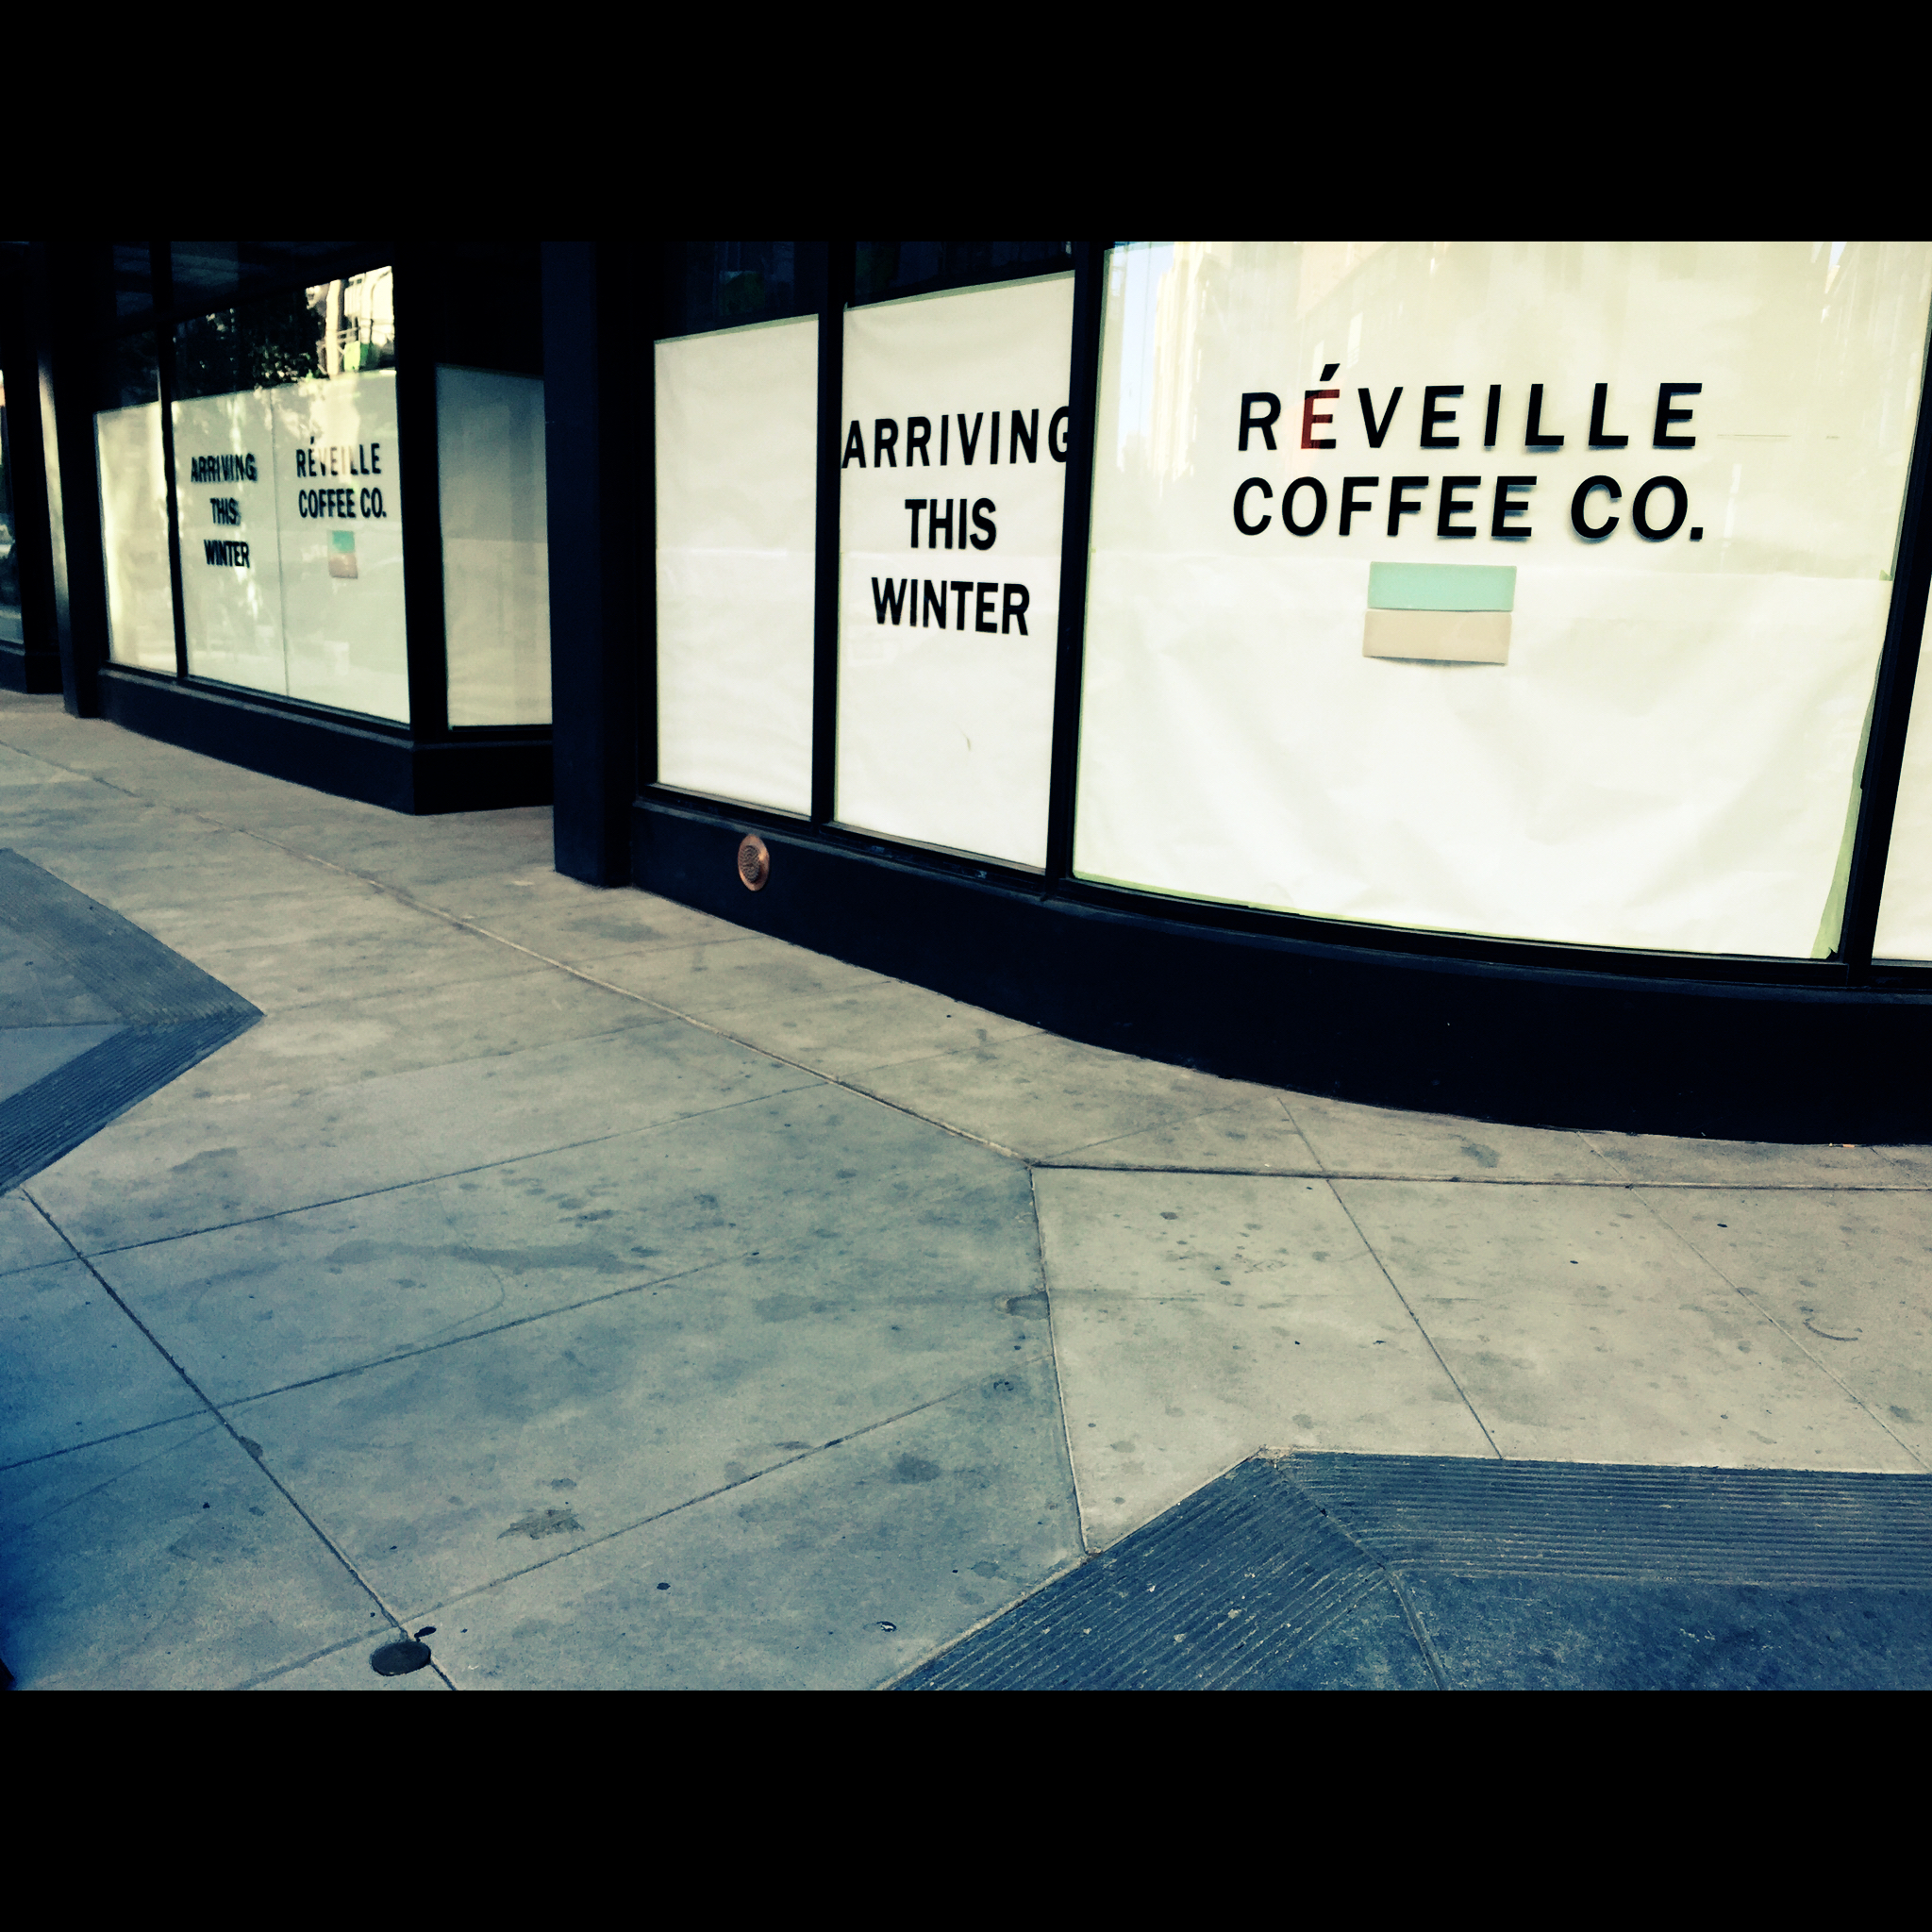 Reveille Coffee Co. is papered up and busy building its new Mission Bay headquarters.